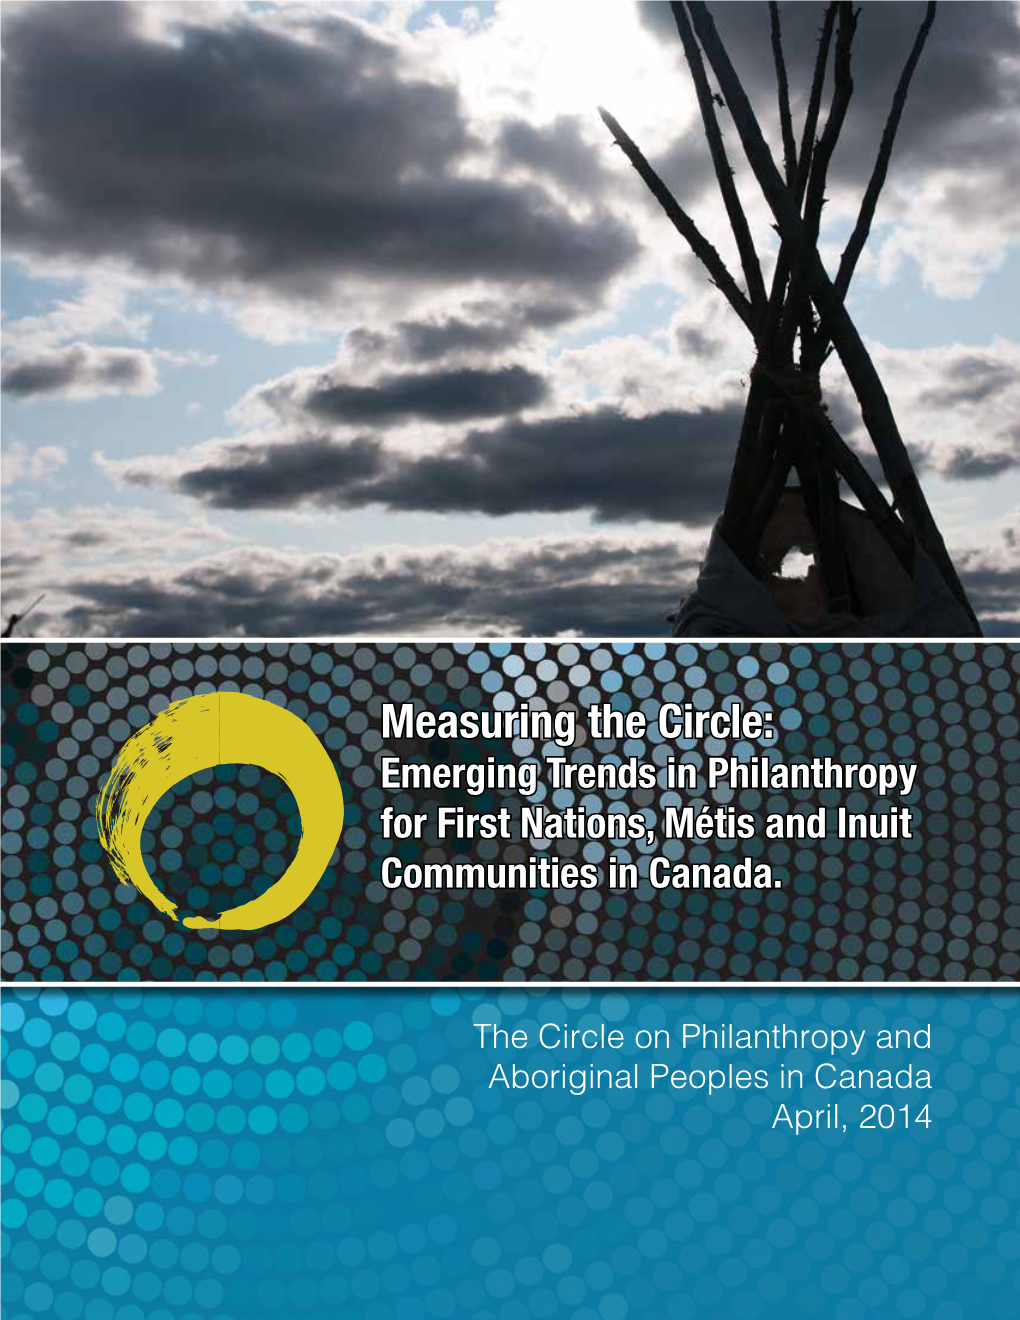 Measuring the Circle: Emerging Trends in Philanthropy for First Nations, Métis and Inuit Communities in Canada